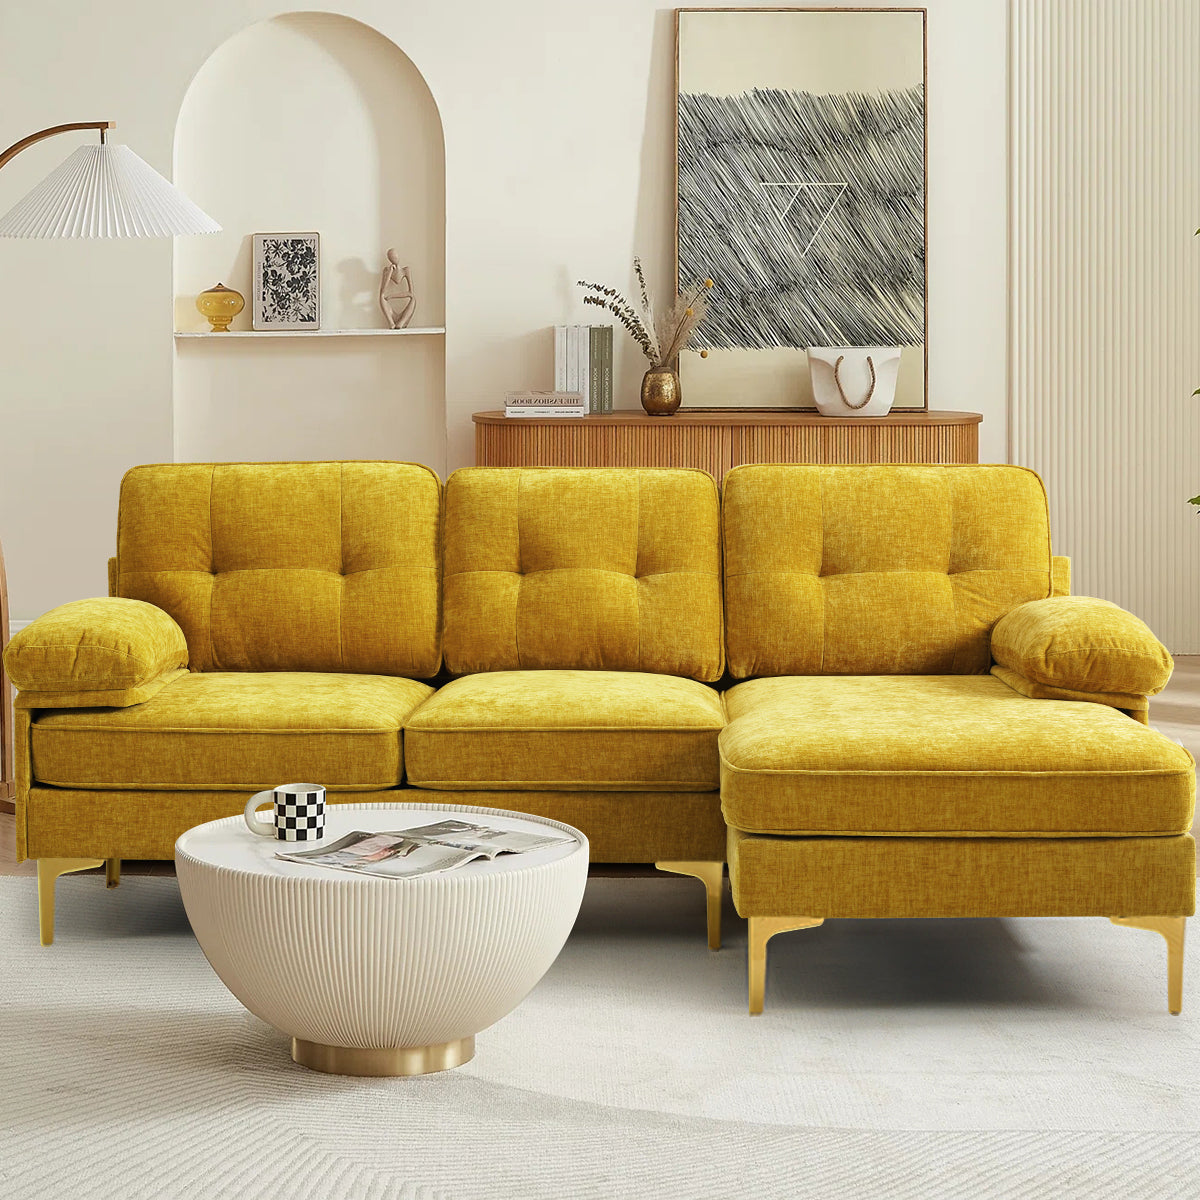 The ultimate secret to creating a comfortable sofa